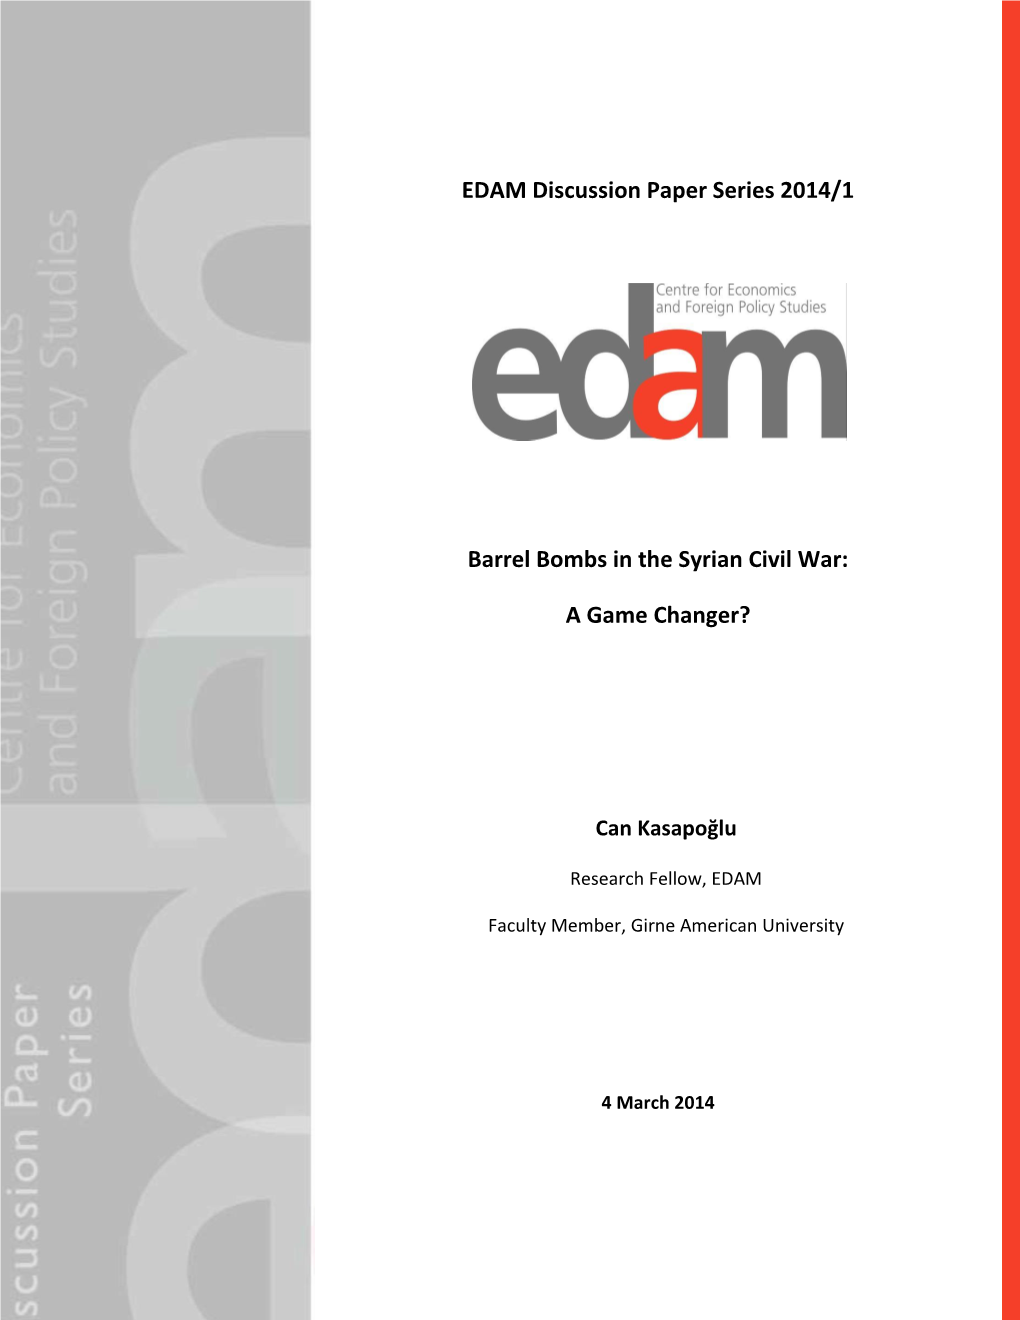 EDAM Discussion Paper Series 2014/1 Barrel Bombs in the Syrian